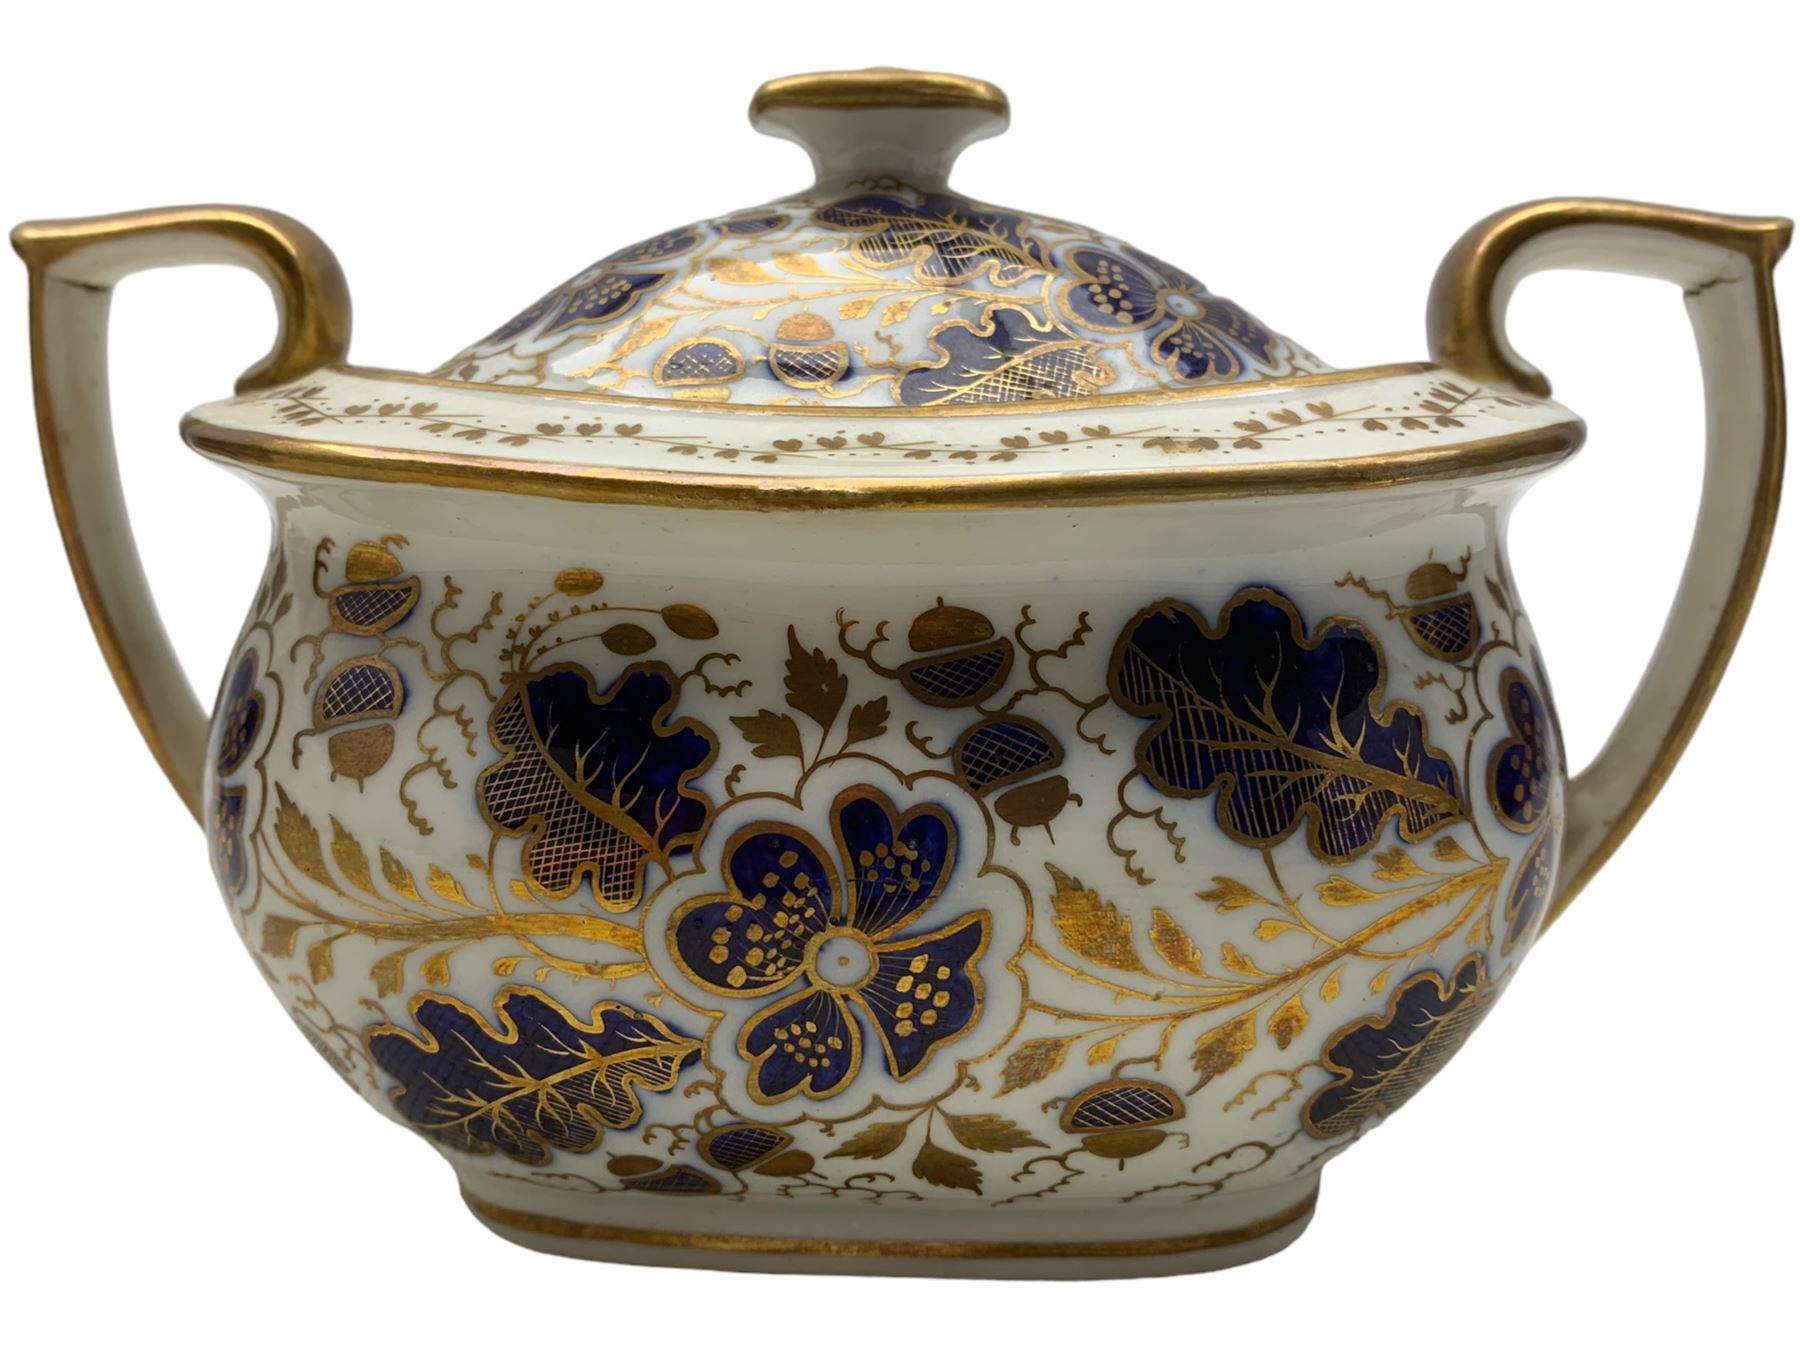 Late 18th century New Hall porcelain - Image 5 of 5